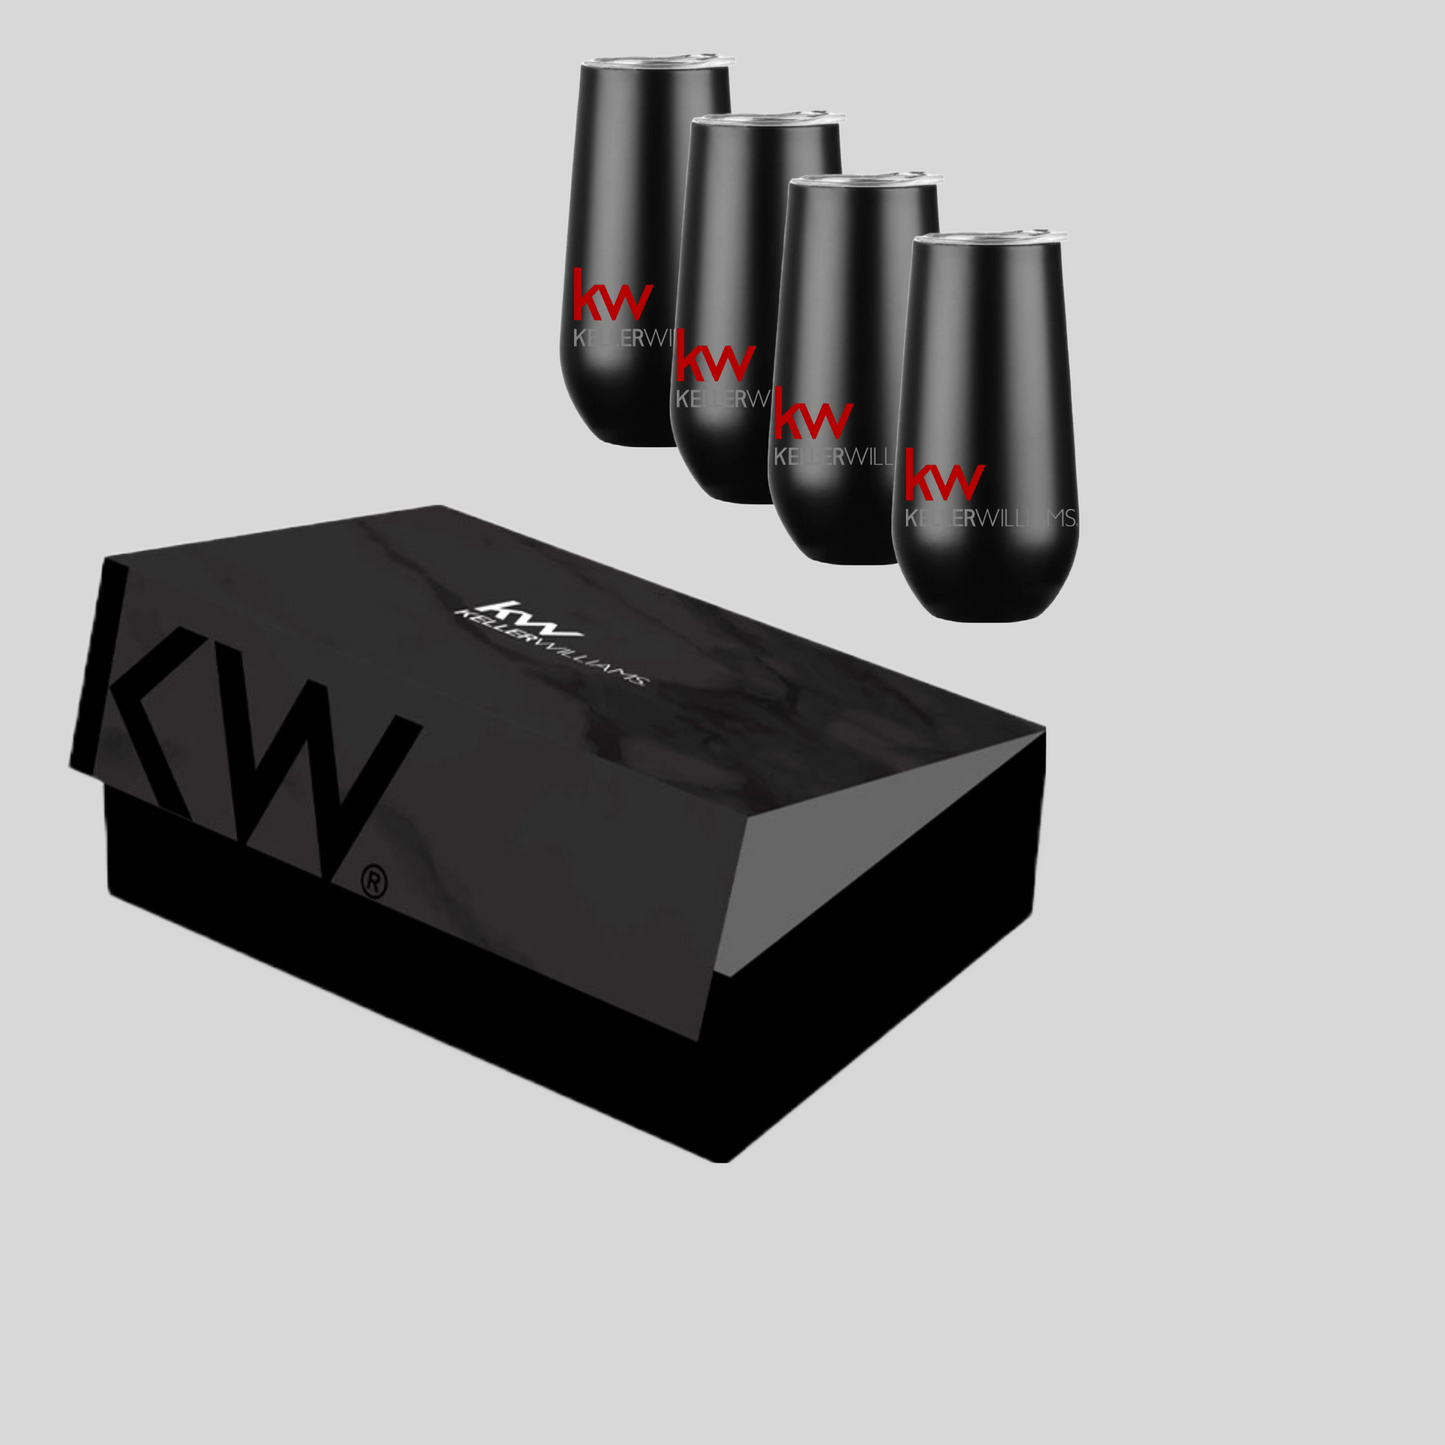 Set of 4 Keller Williams Wine tumblers in KW Closing Gift Box (from $$83 per complete box)